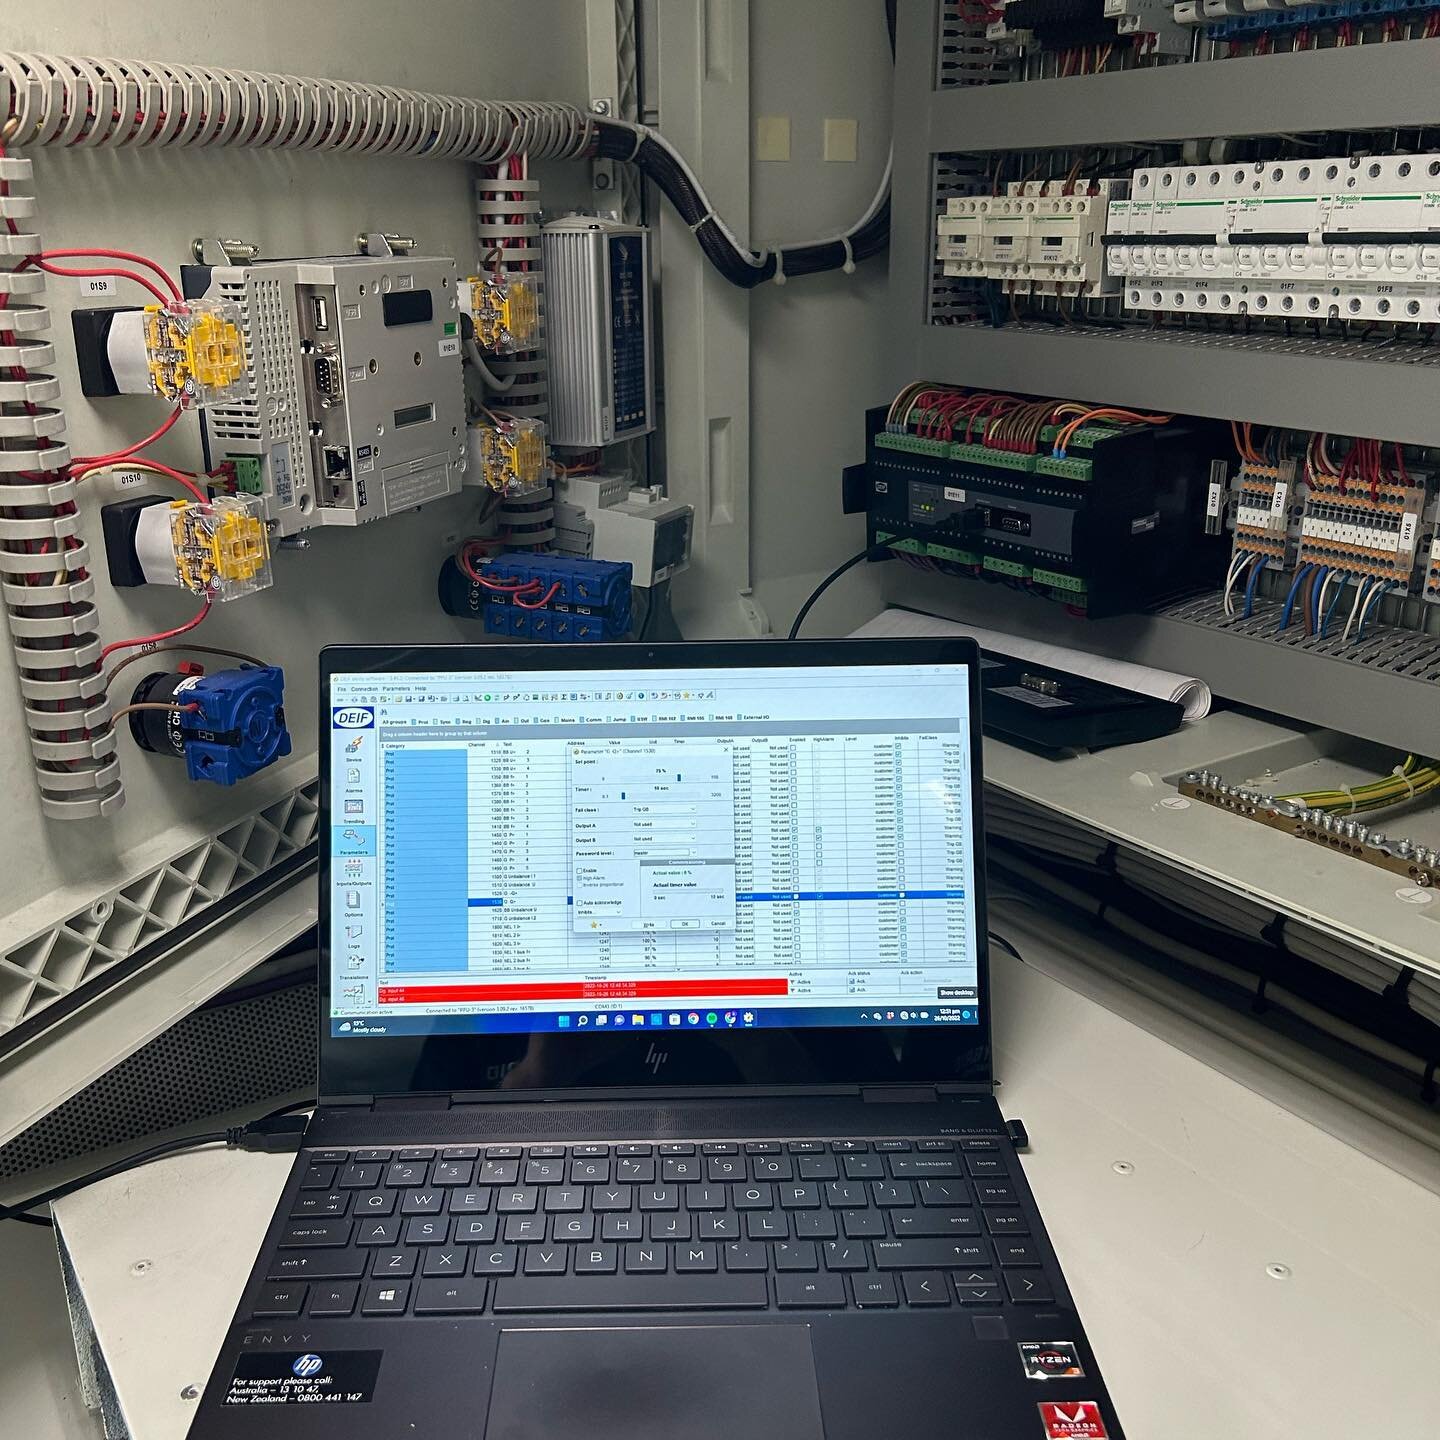 A 70 meter sailing vessel had huge issues with reactive load and current sharing between their two generators when connected in parallel. We completed a full test report and diagnosed the cause to be one faulty Basler AVR and incorrect AVR settings. 